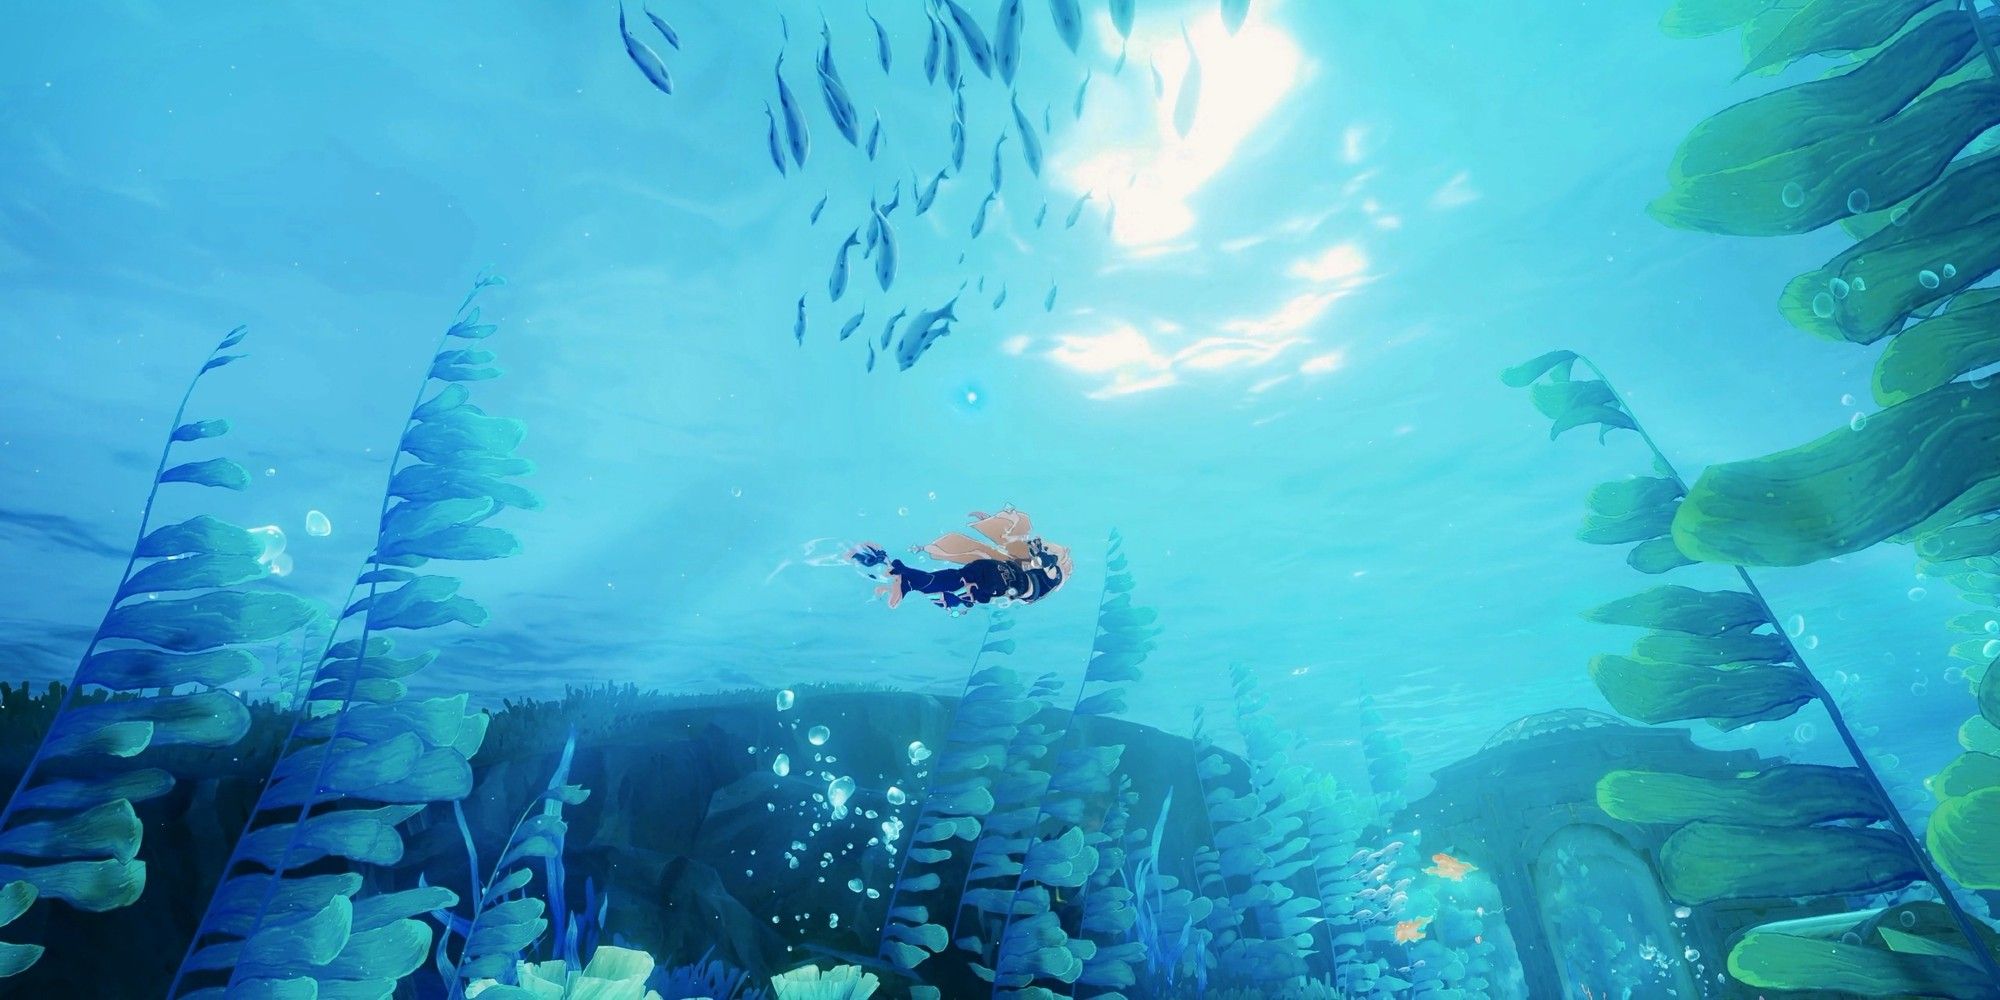 Genshin Impact's male Traveler swims underwater in a preview of the Fontaine region. There are algae close to him and a school of fish swimming nearby.